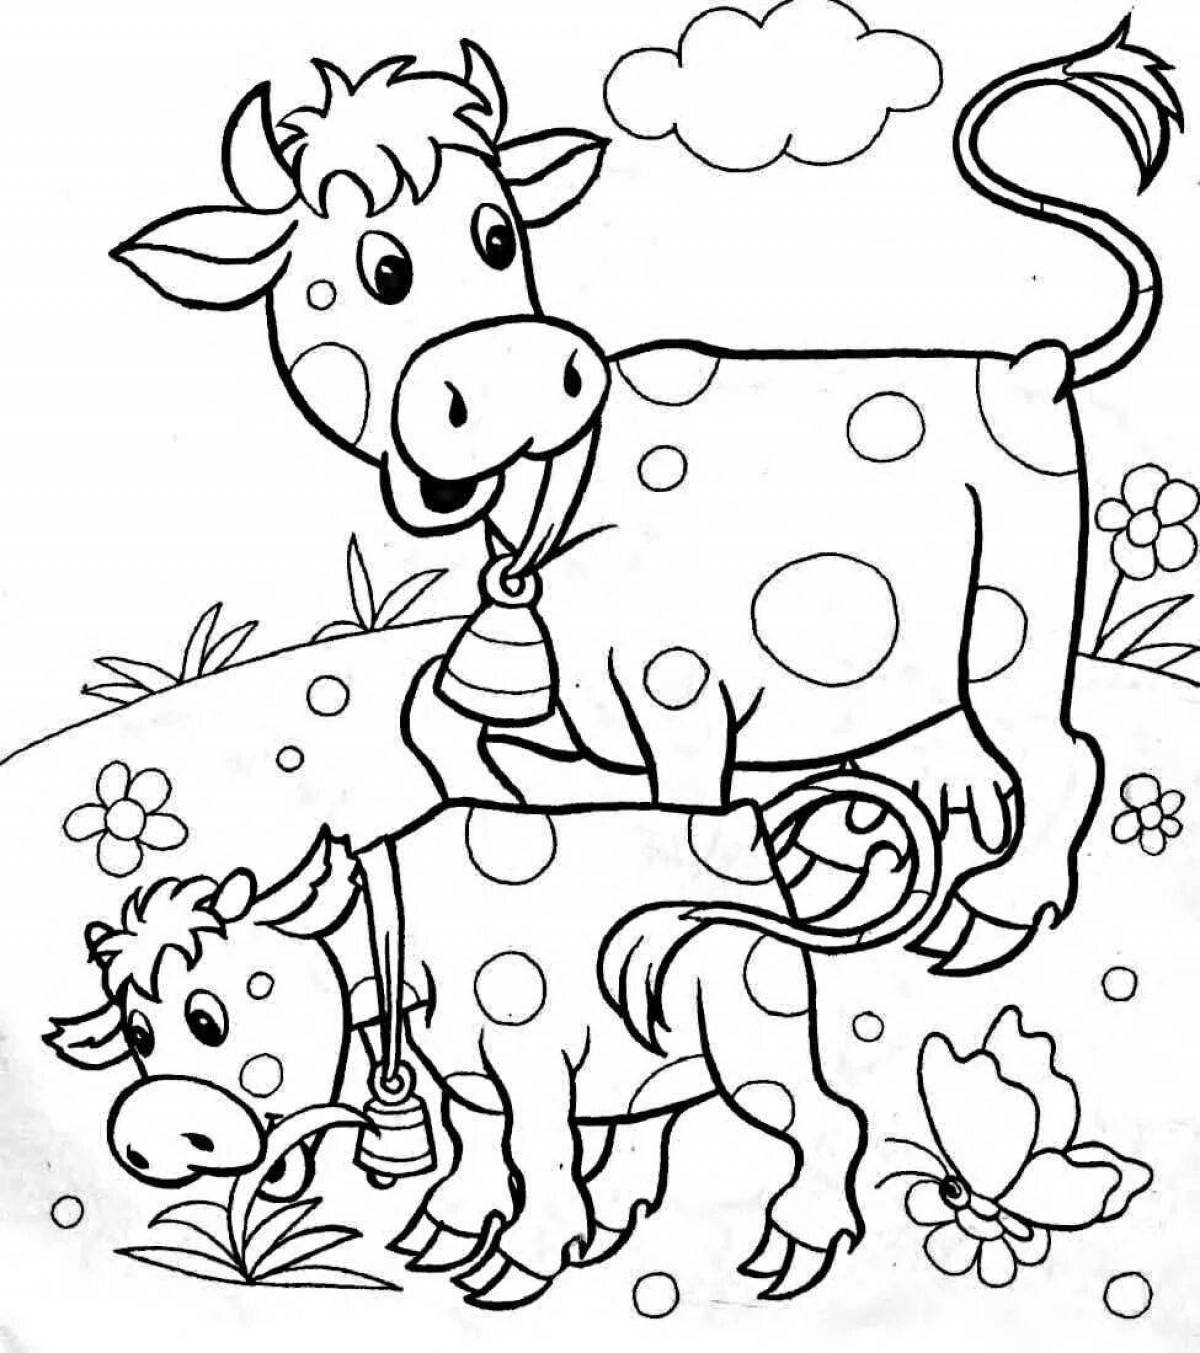 Fun coloring pages of pets for children 5-6 years old